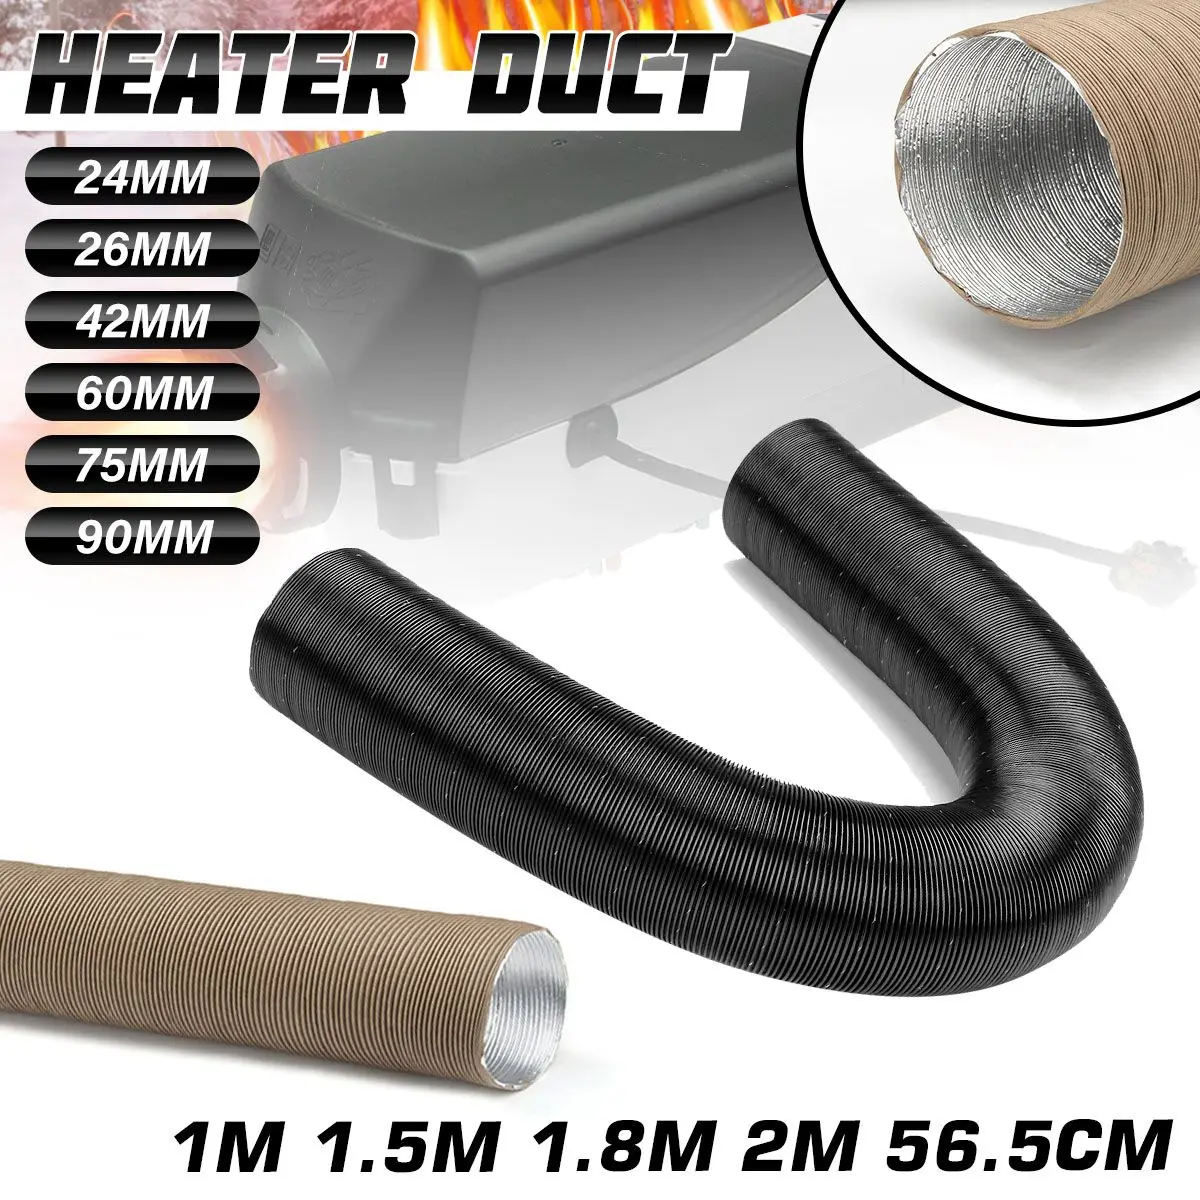 JUSTJUNMIN 50-100cm 75mm Car Heater Ducting Pipe Diesel Parking Heater Air Vent Outlet Y Piece Connector Fit for Webasto Dometic Planer Car Heater Parts